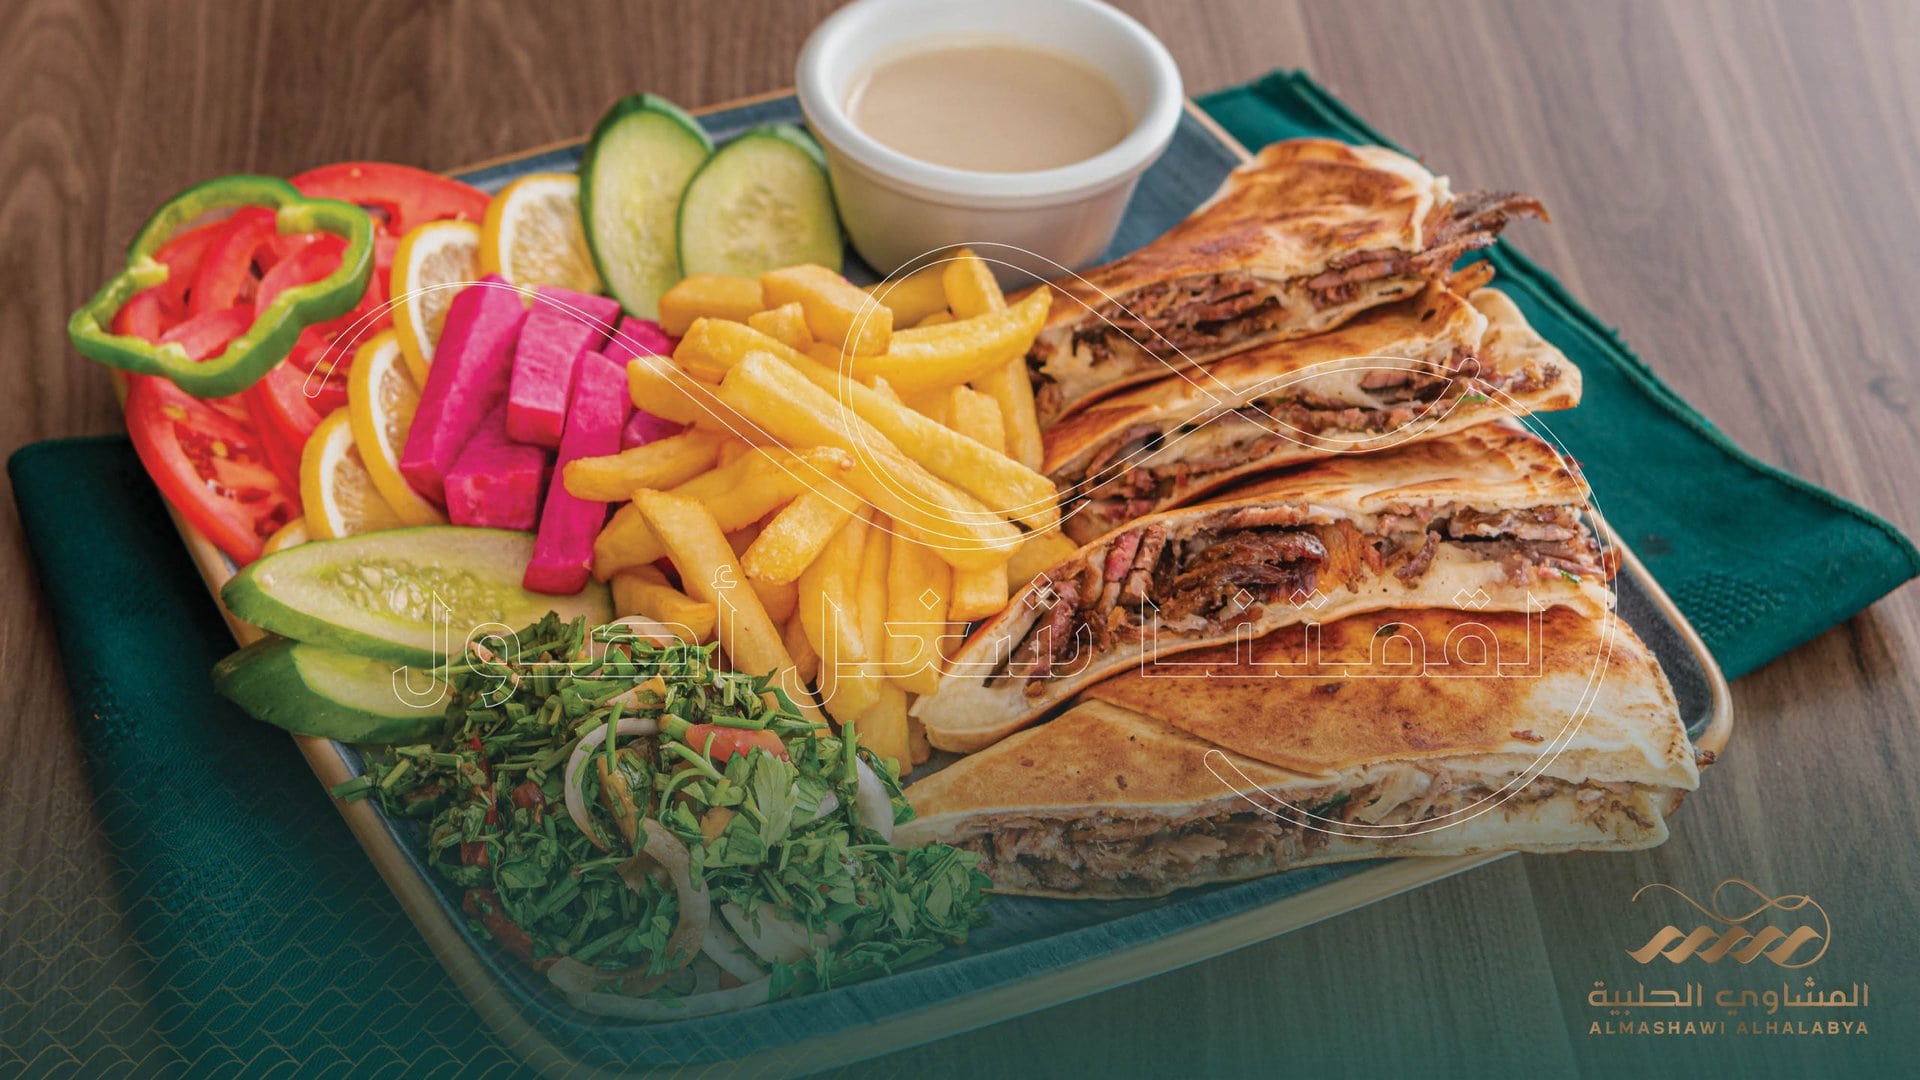 What Makes Shawarma Such a Popular Choice Among People?